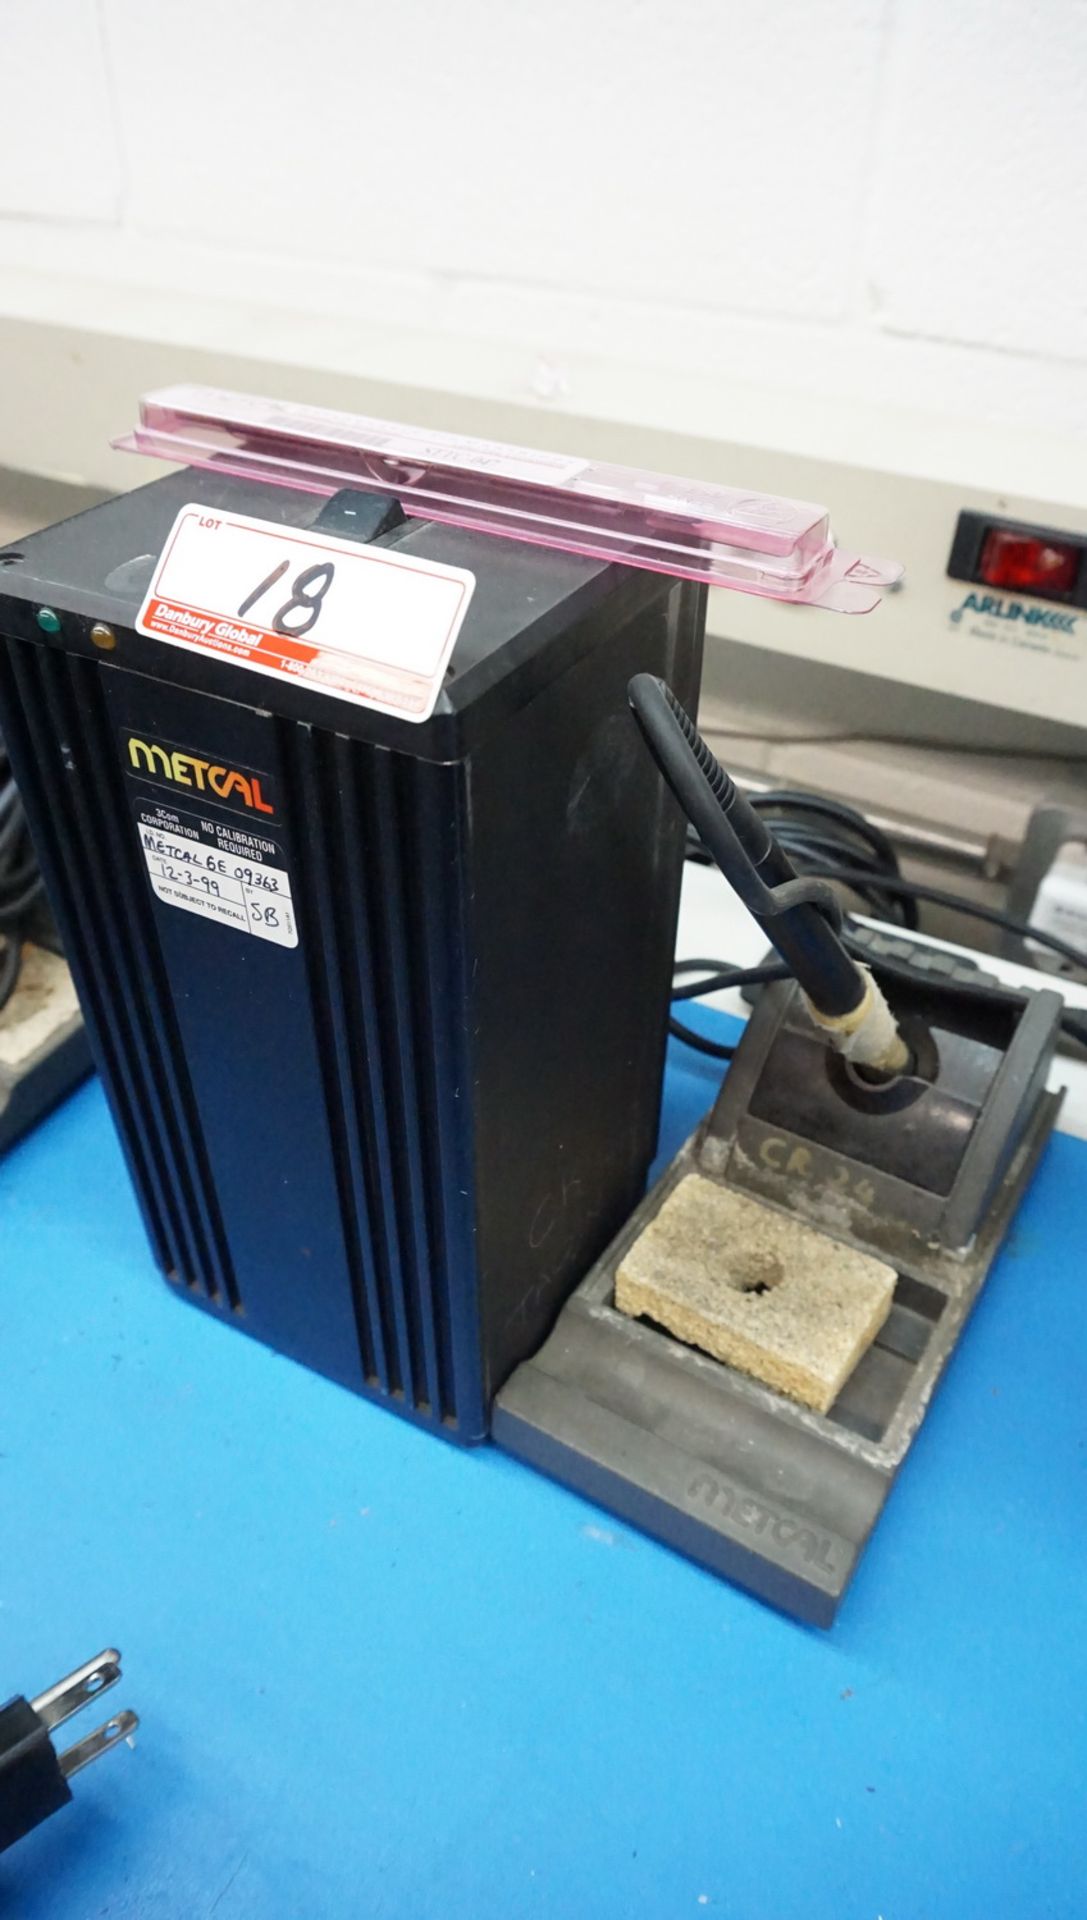 METCAL PS2E-01 SOLDERING STATION